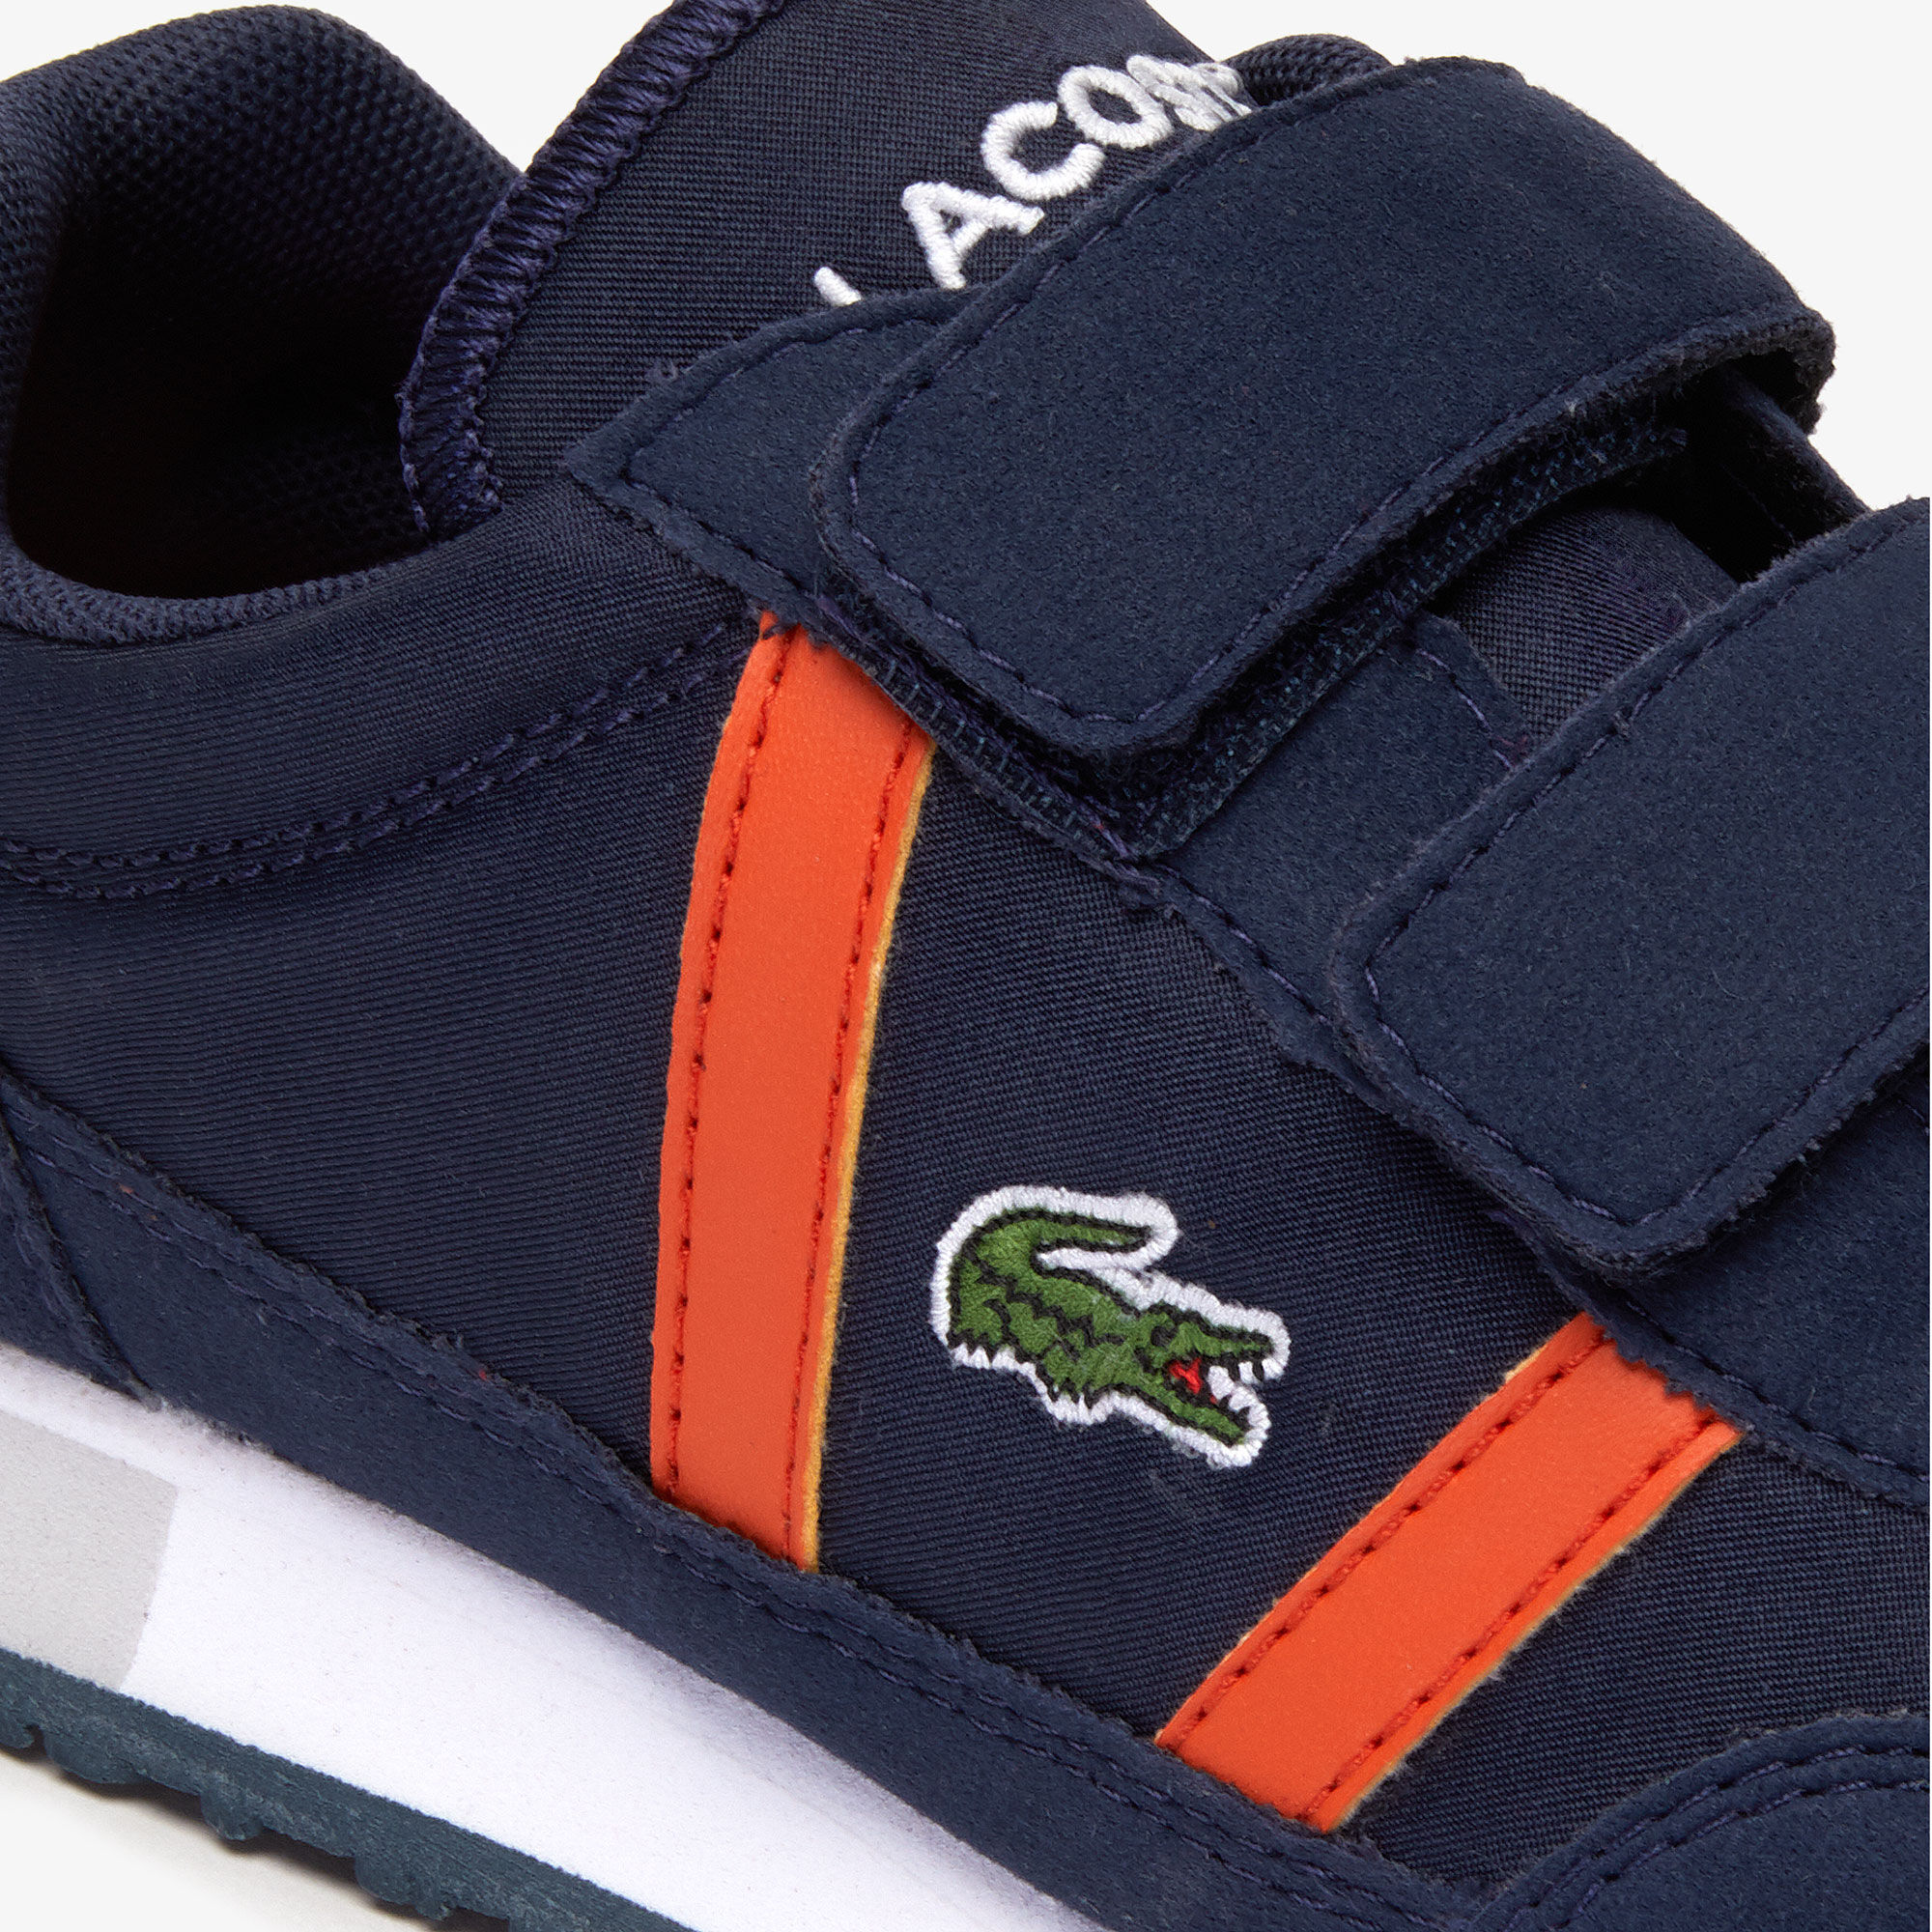 Kids' Masters Leather Trainers